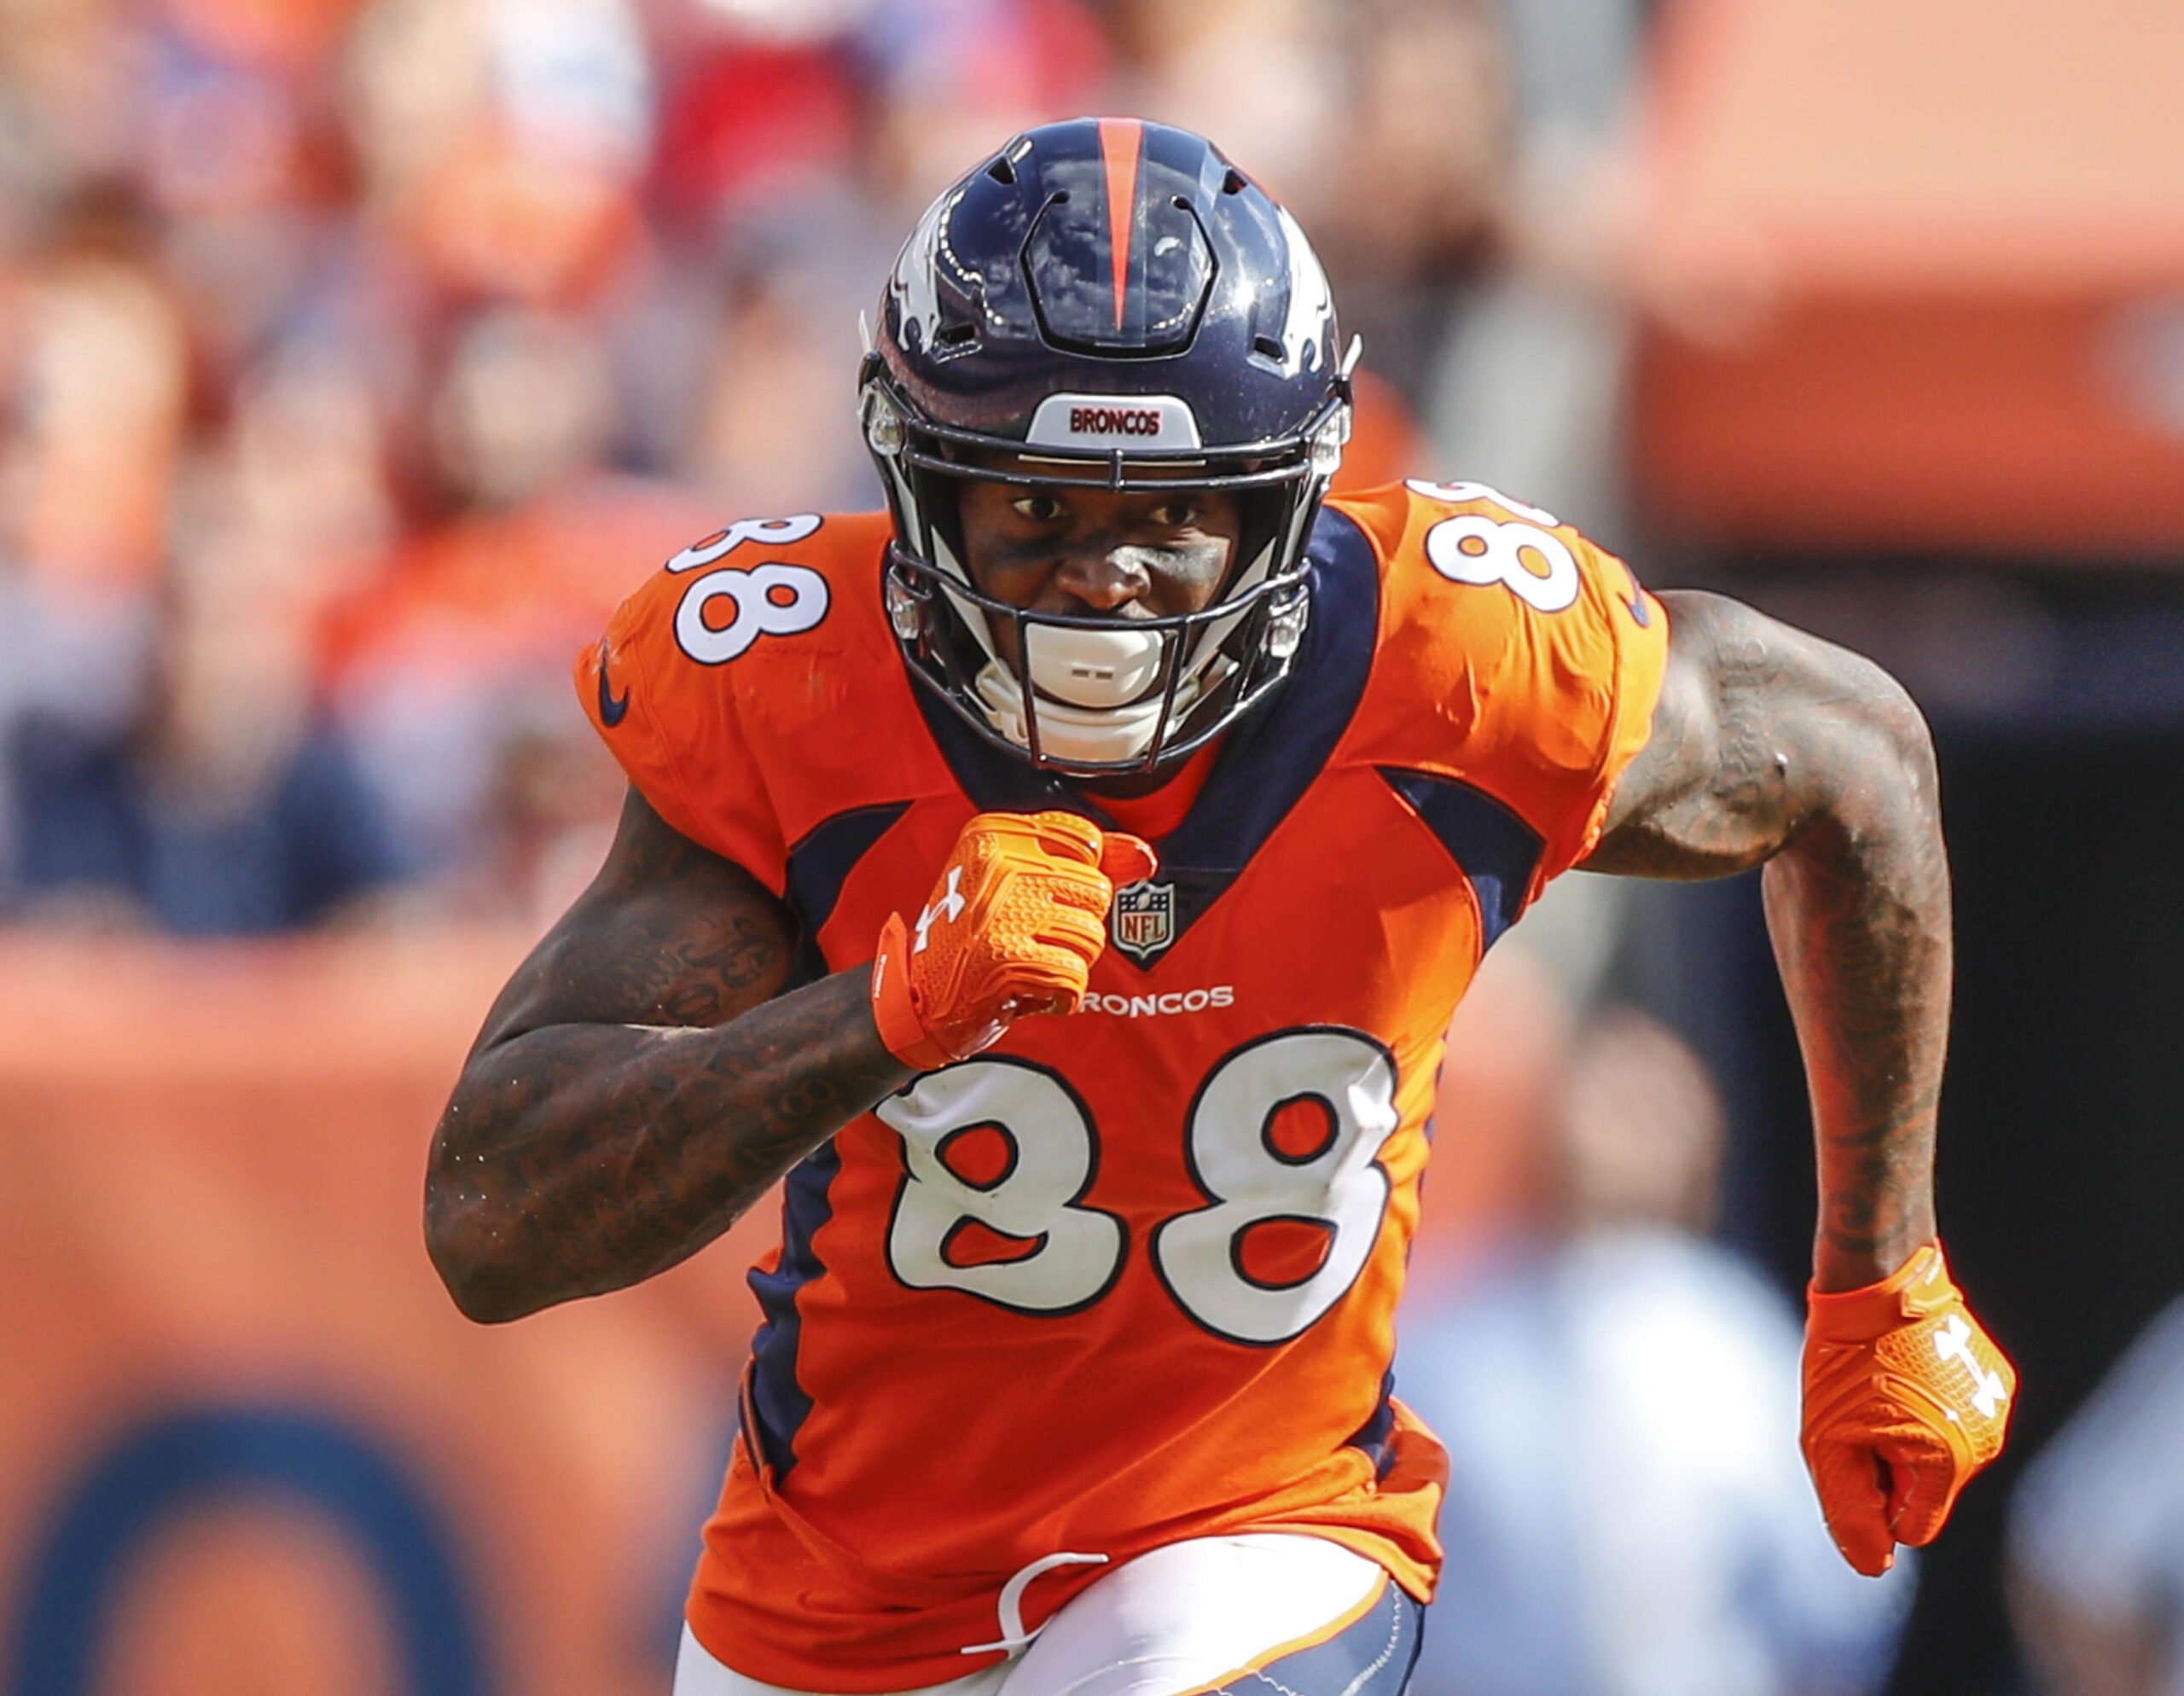 FILE - In this Sept. 16, 2018, file photo, Denver Broncos wide receiver Demaryius Thomas (88) runs against the Oakland Raiders during the second half of an NFL football game, in Denver. Former NFL star Demaryius Thomas, who died last December at age 33, had CTE, his family said Tuesday, July 5, 2022. (AP Photo/Jack Dempsey, File)